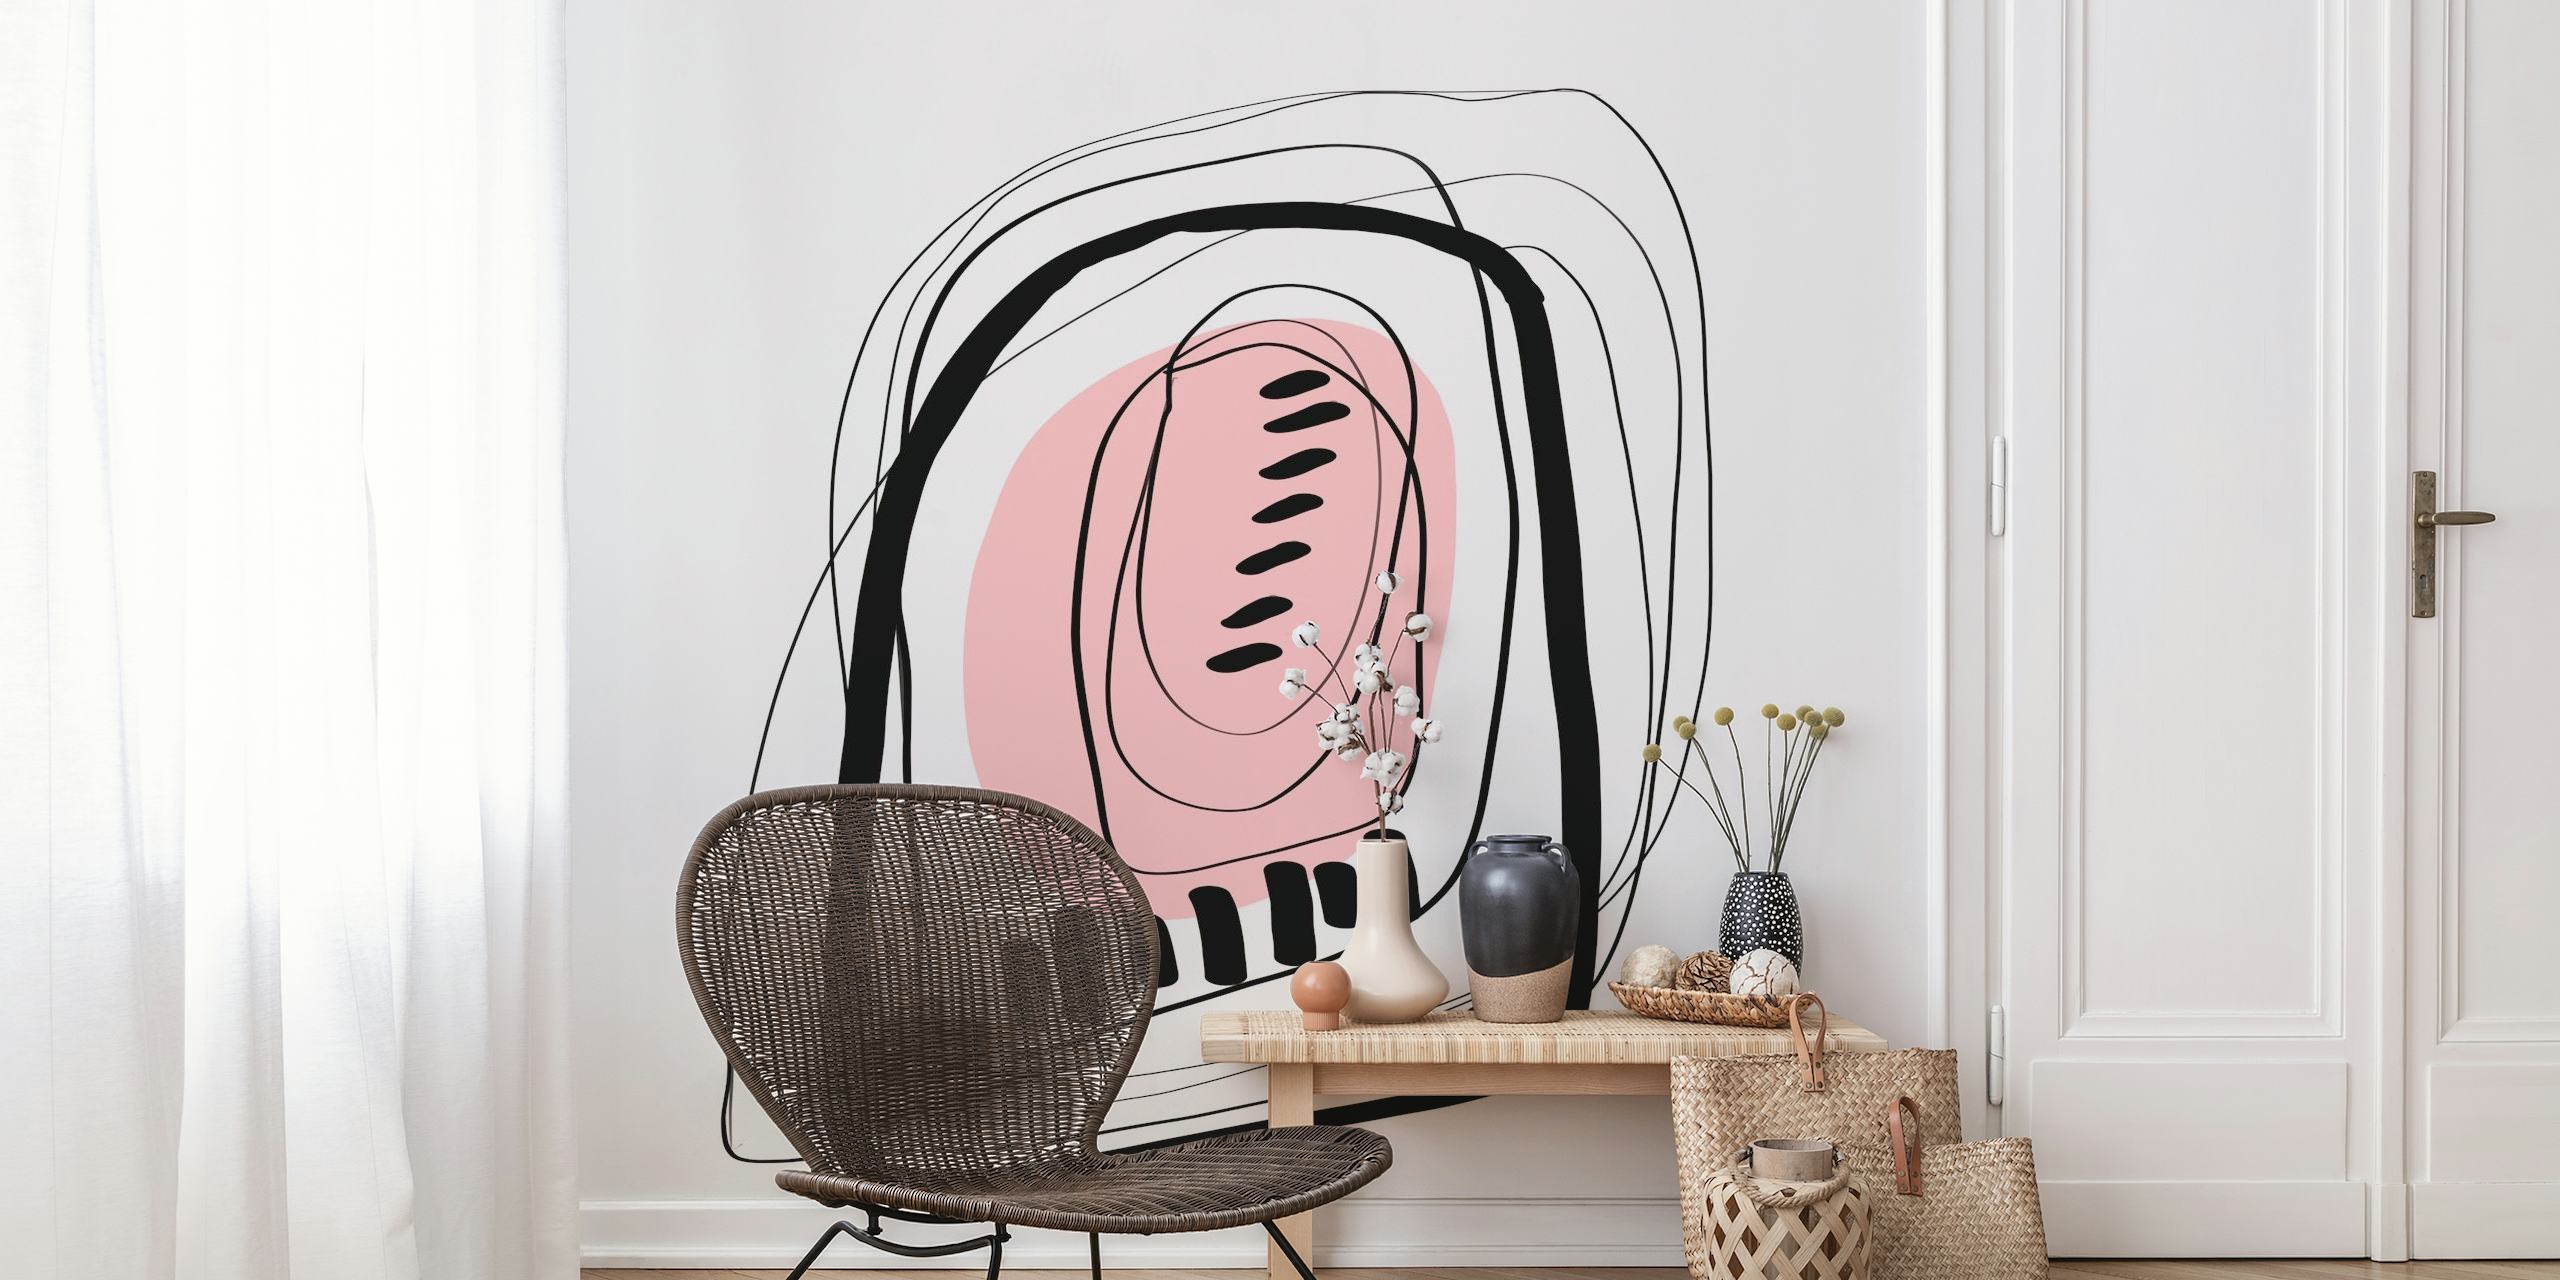 Abstract minimalistic wall mural with soft pink and black shapes on a neutral background